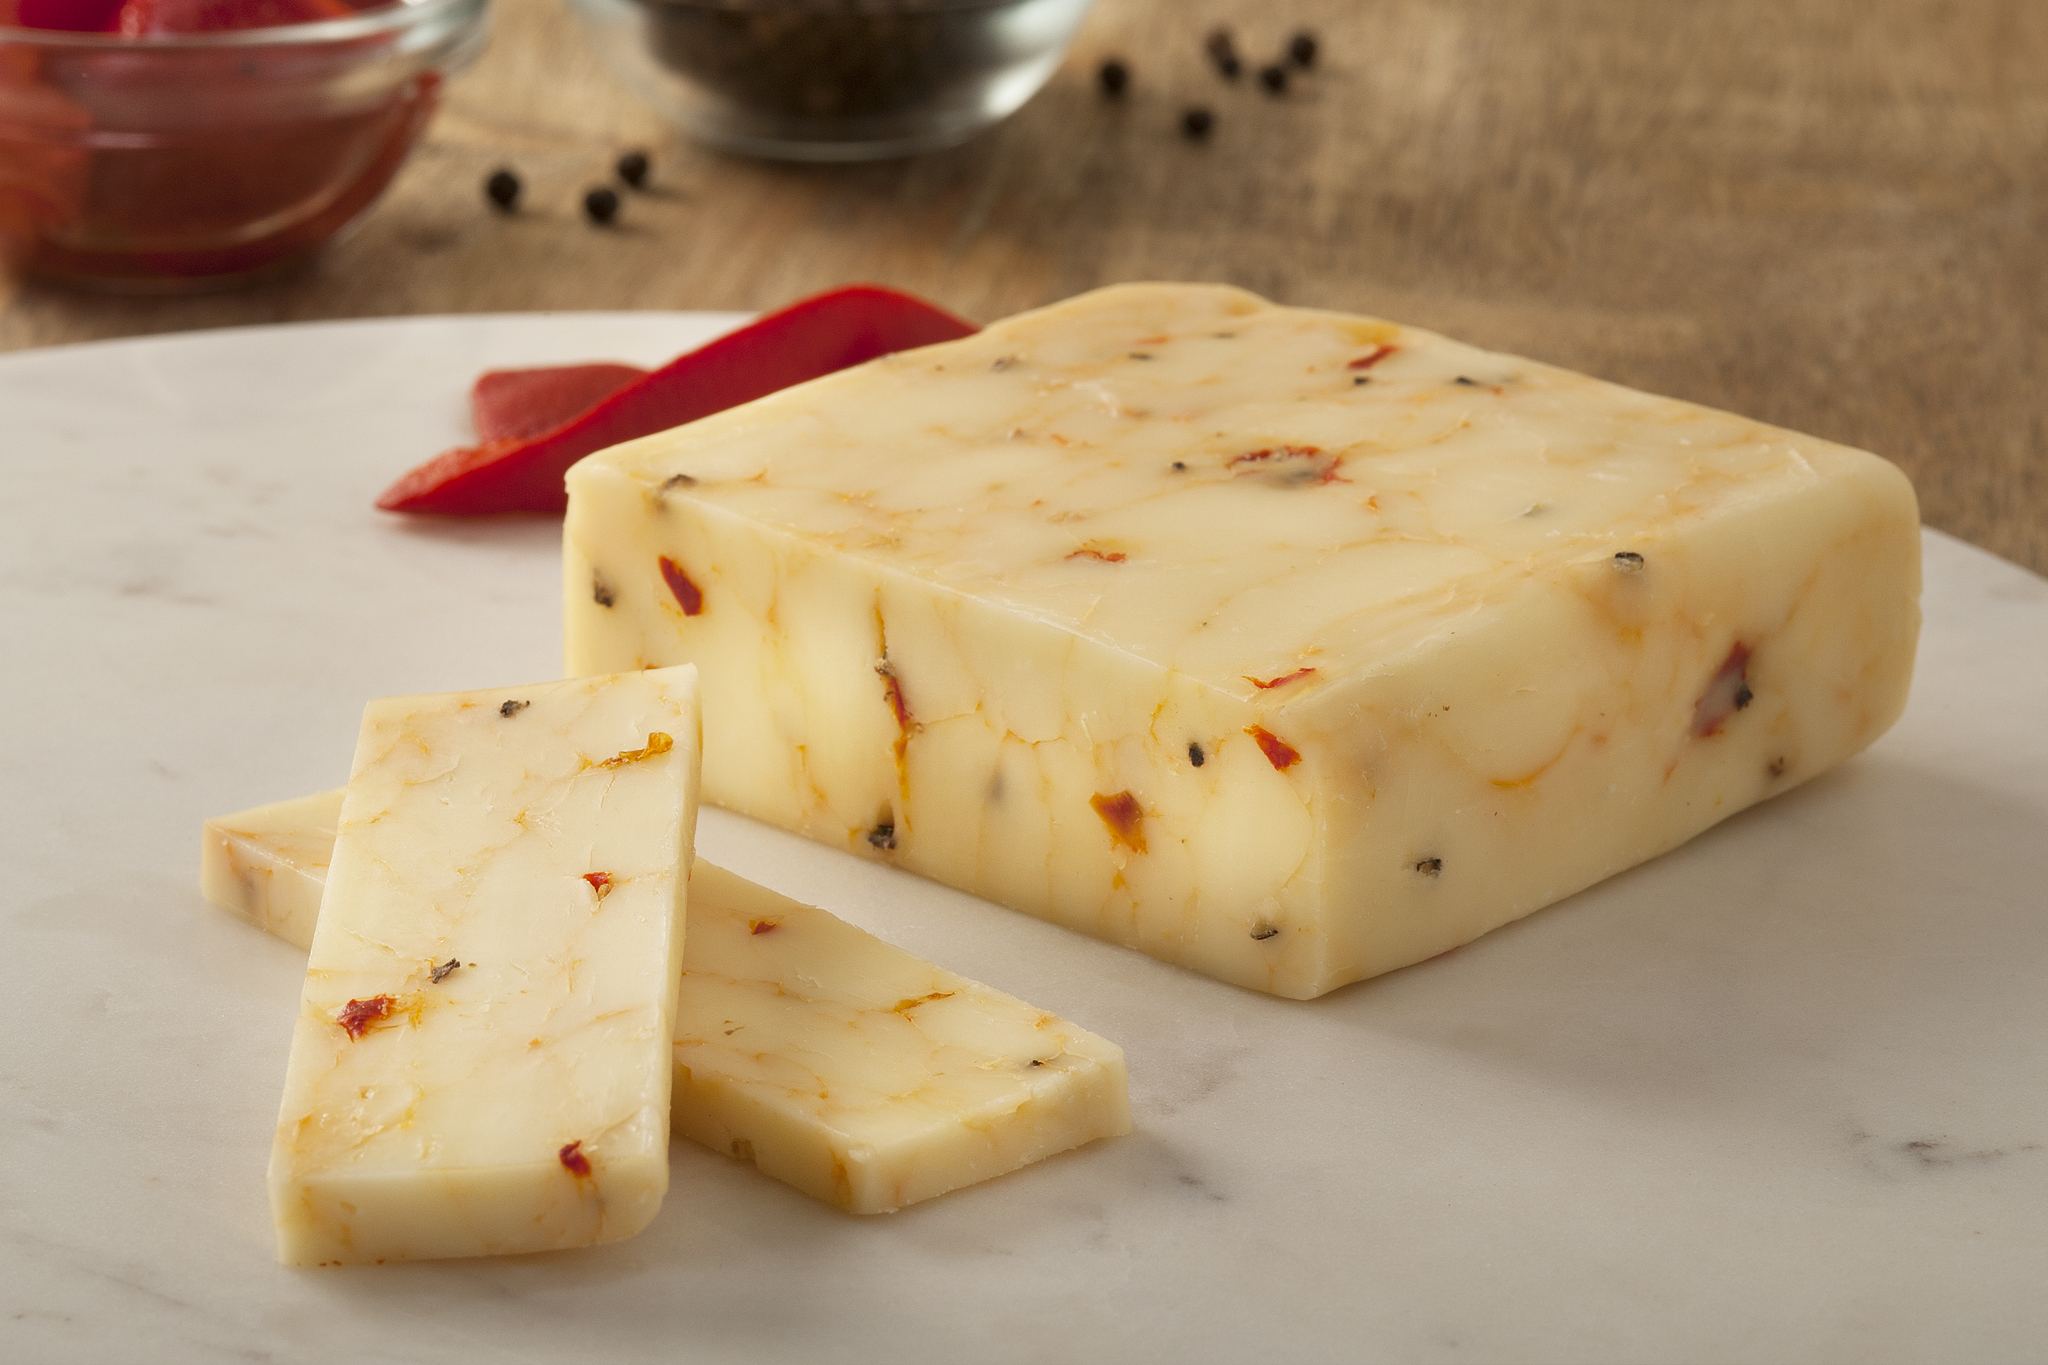 Wood River Creamery Roasted Red Pepper & Cracked Peppercorn beauty